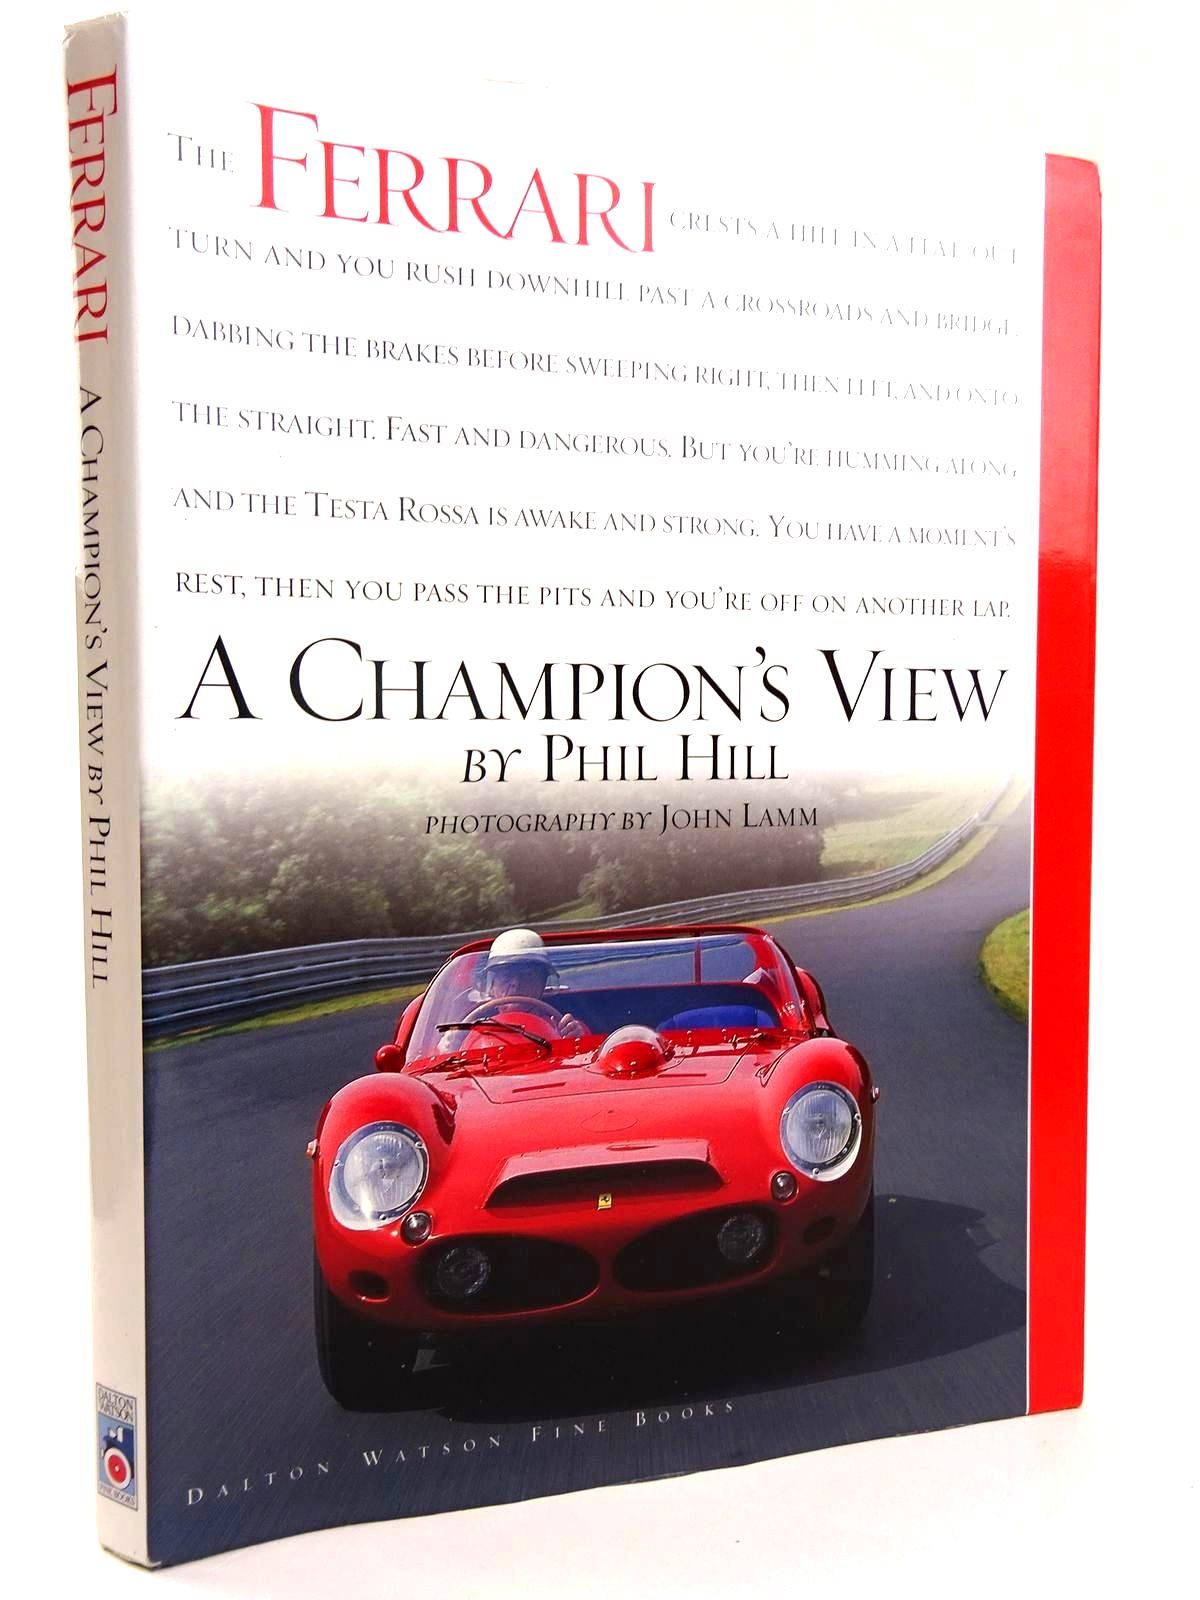 Photo of FERRARI THE SPORTS RACING CARS A CHAMPION'S VIEW written by Hill, Phil published by Dalton Watson Fine Books (STOCK CODE: 2131699)  for sale by Stella & Rose's Books